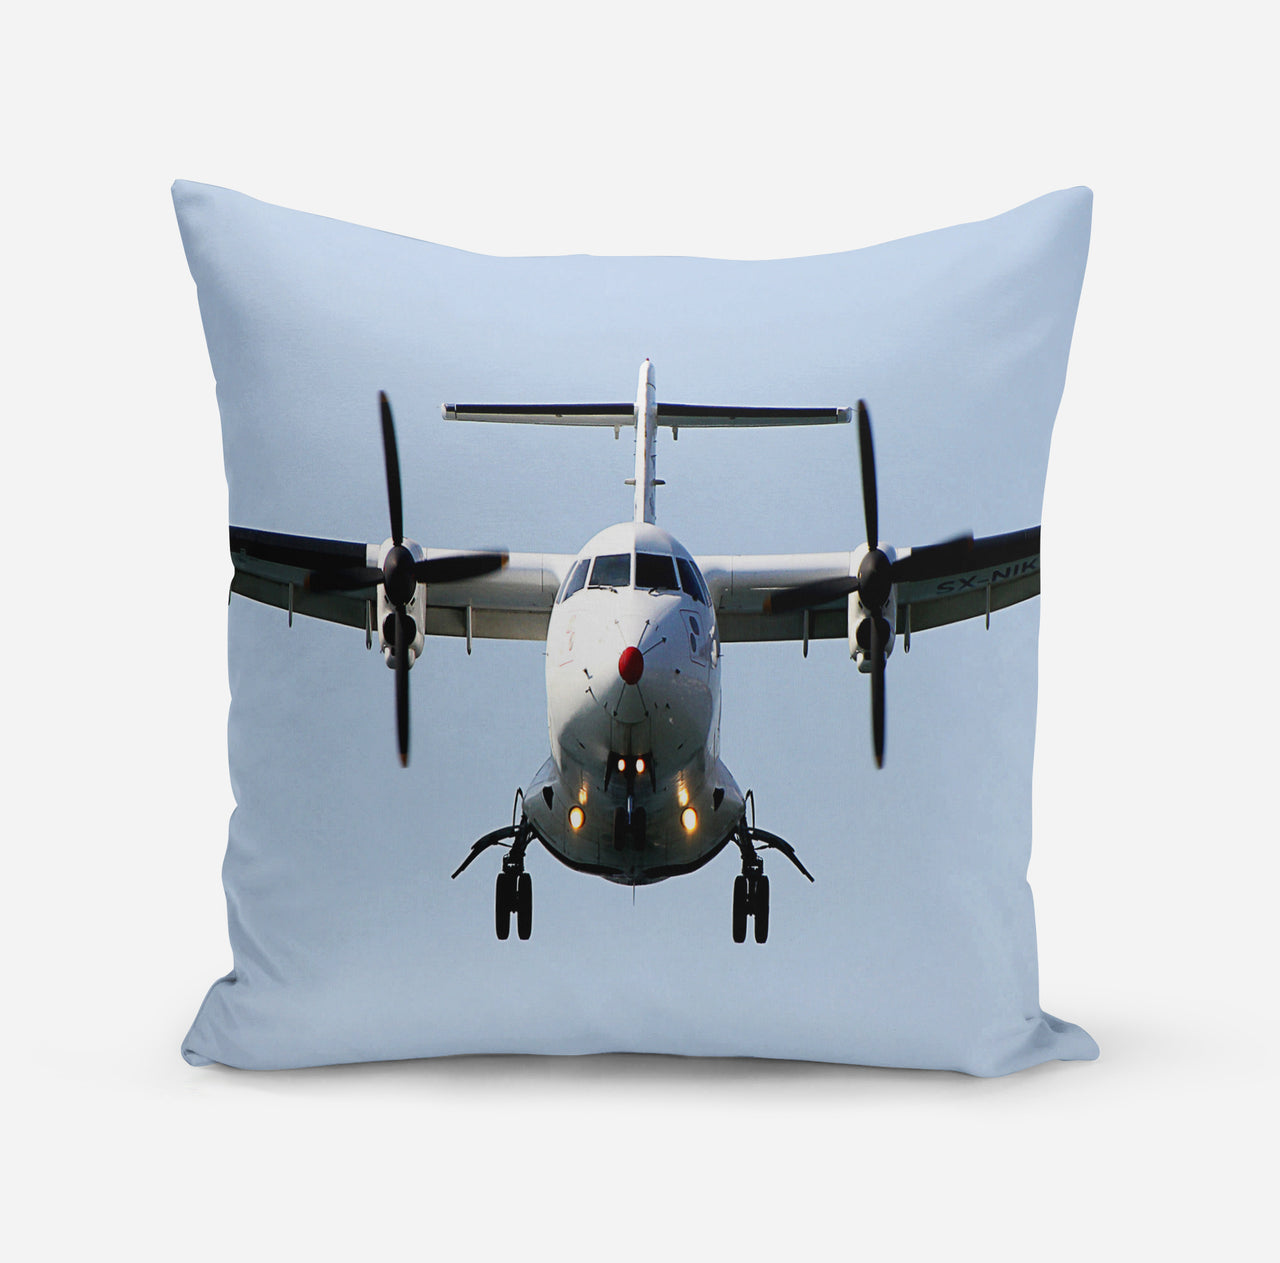 Face to Face with an ATR Designed Pillows